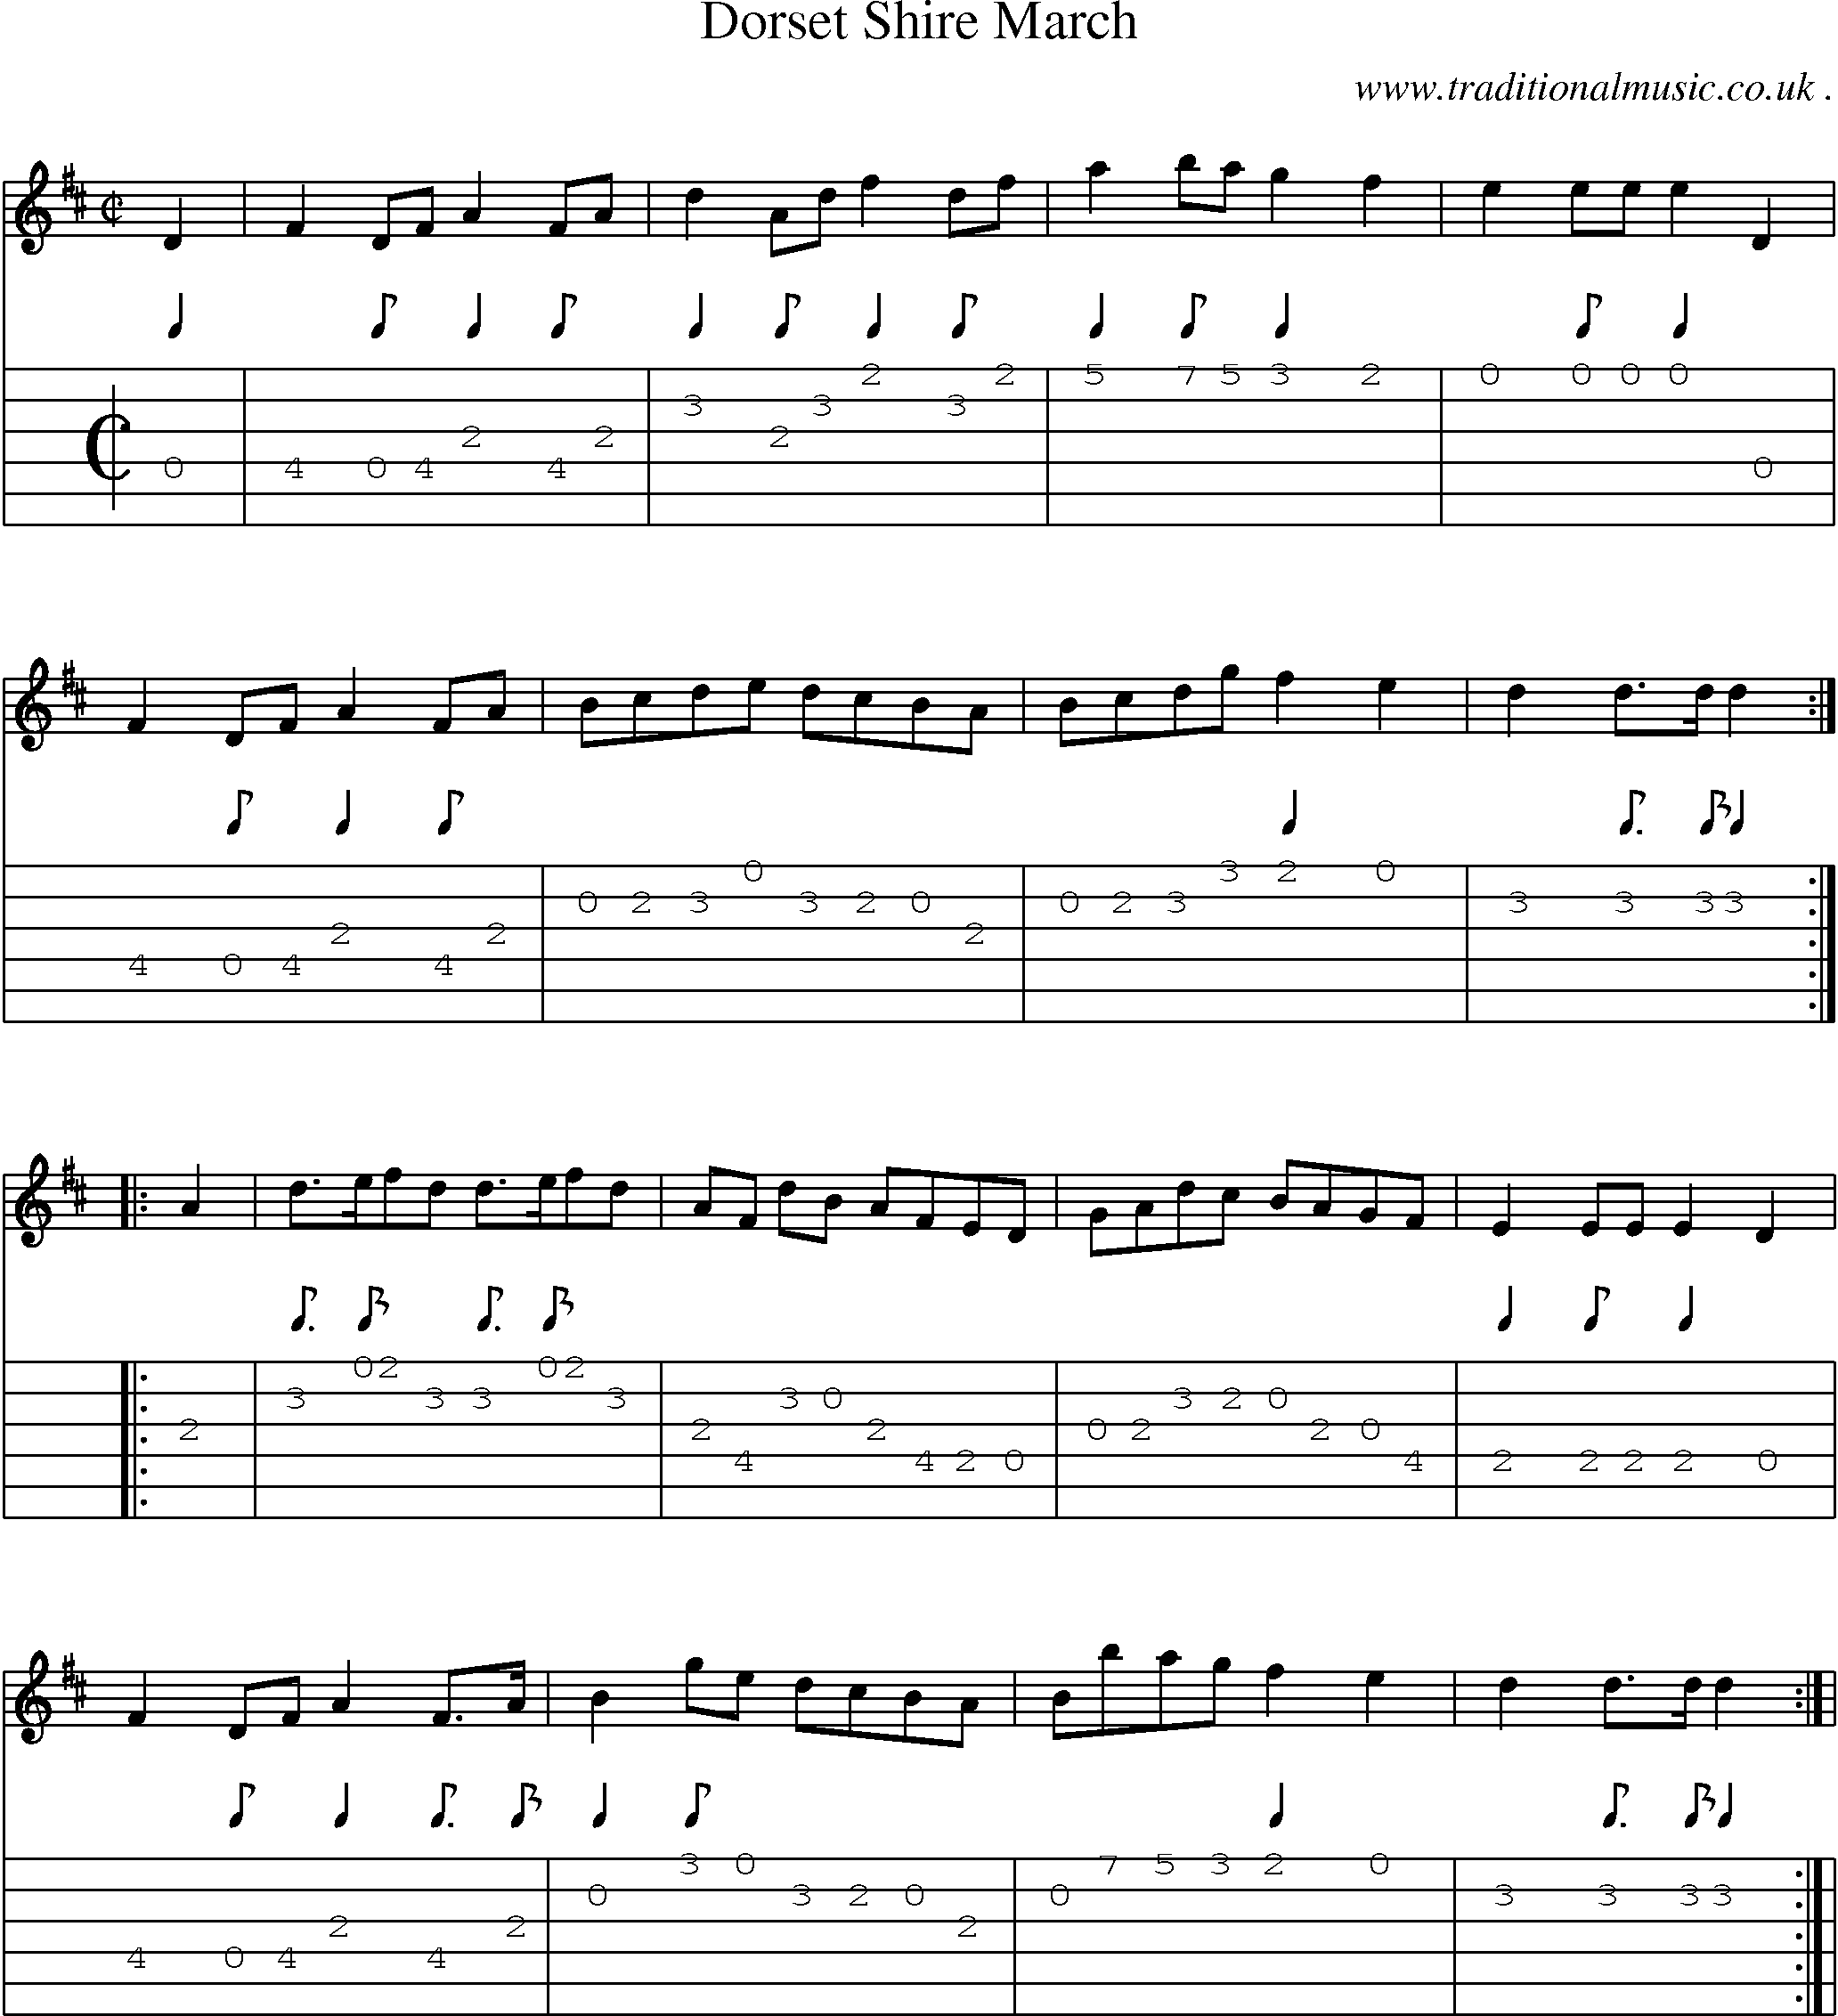 Sheet-Music and Guitar Tabs for Dorset Shire March